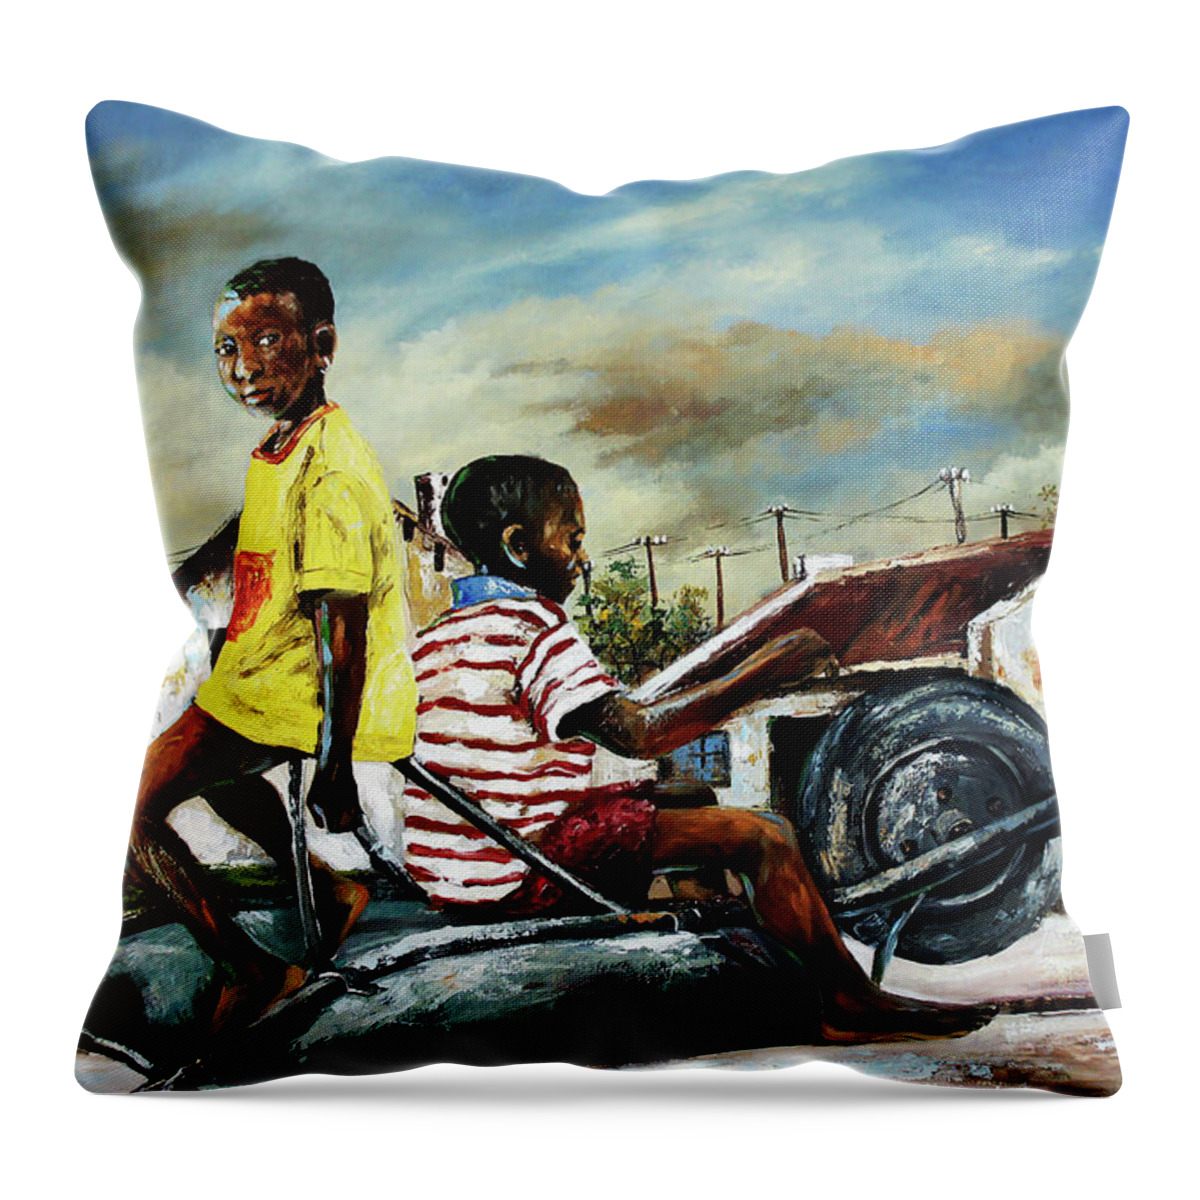  Throw Pillow featuring the painting 22MB jpeg by Berthold